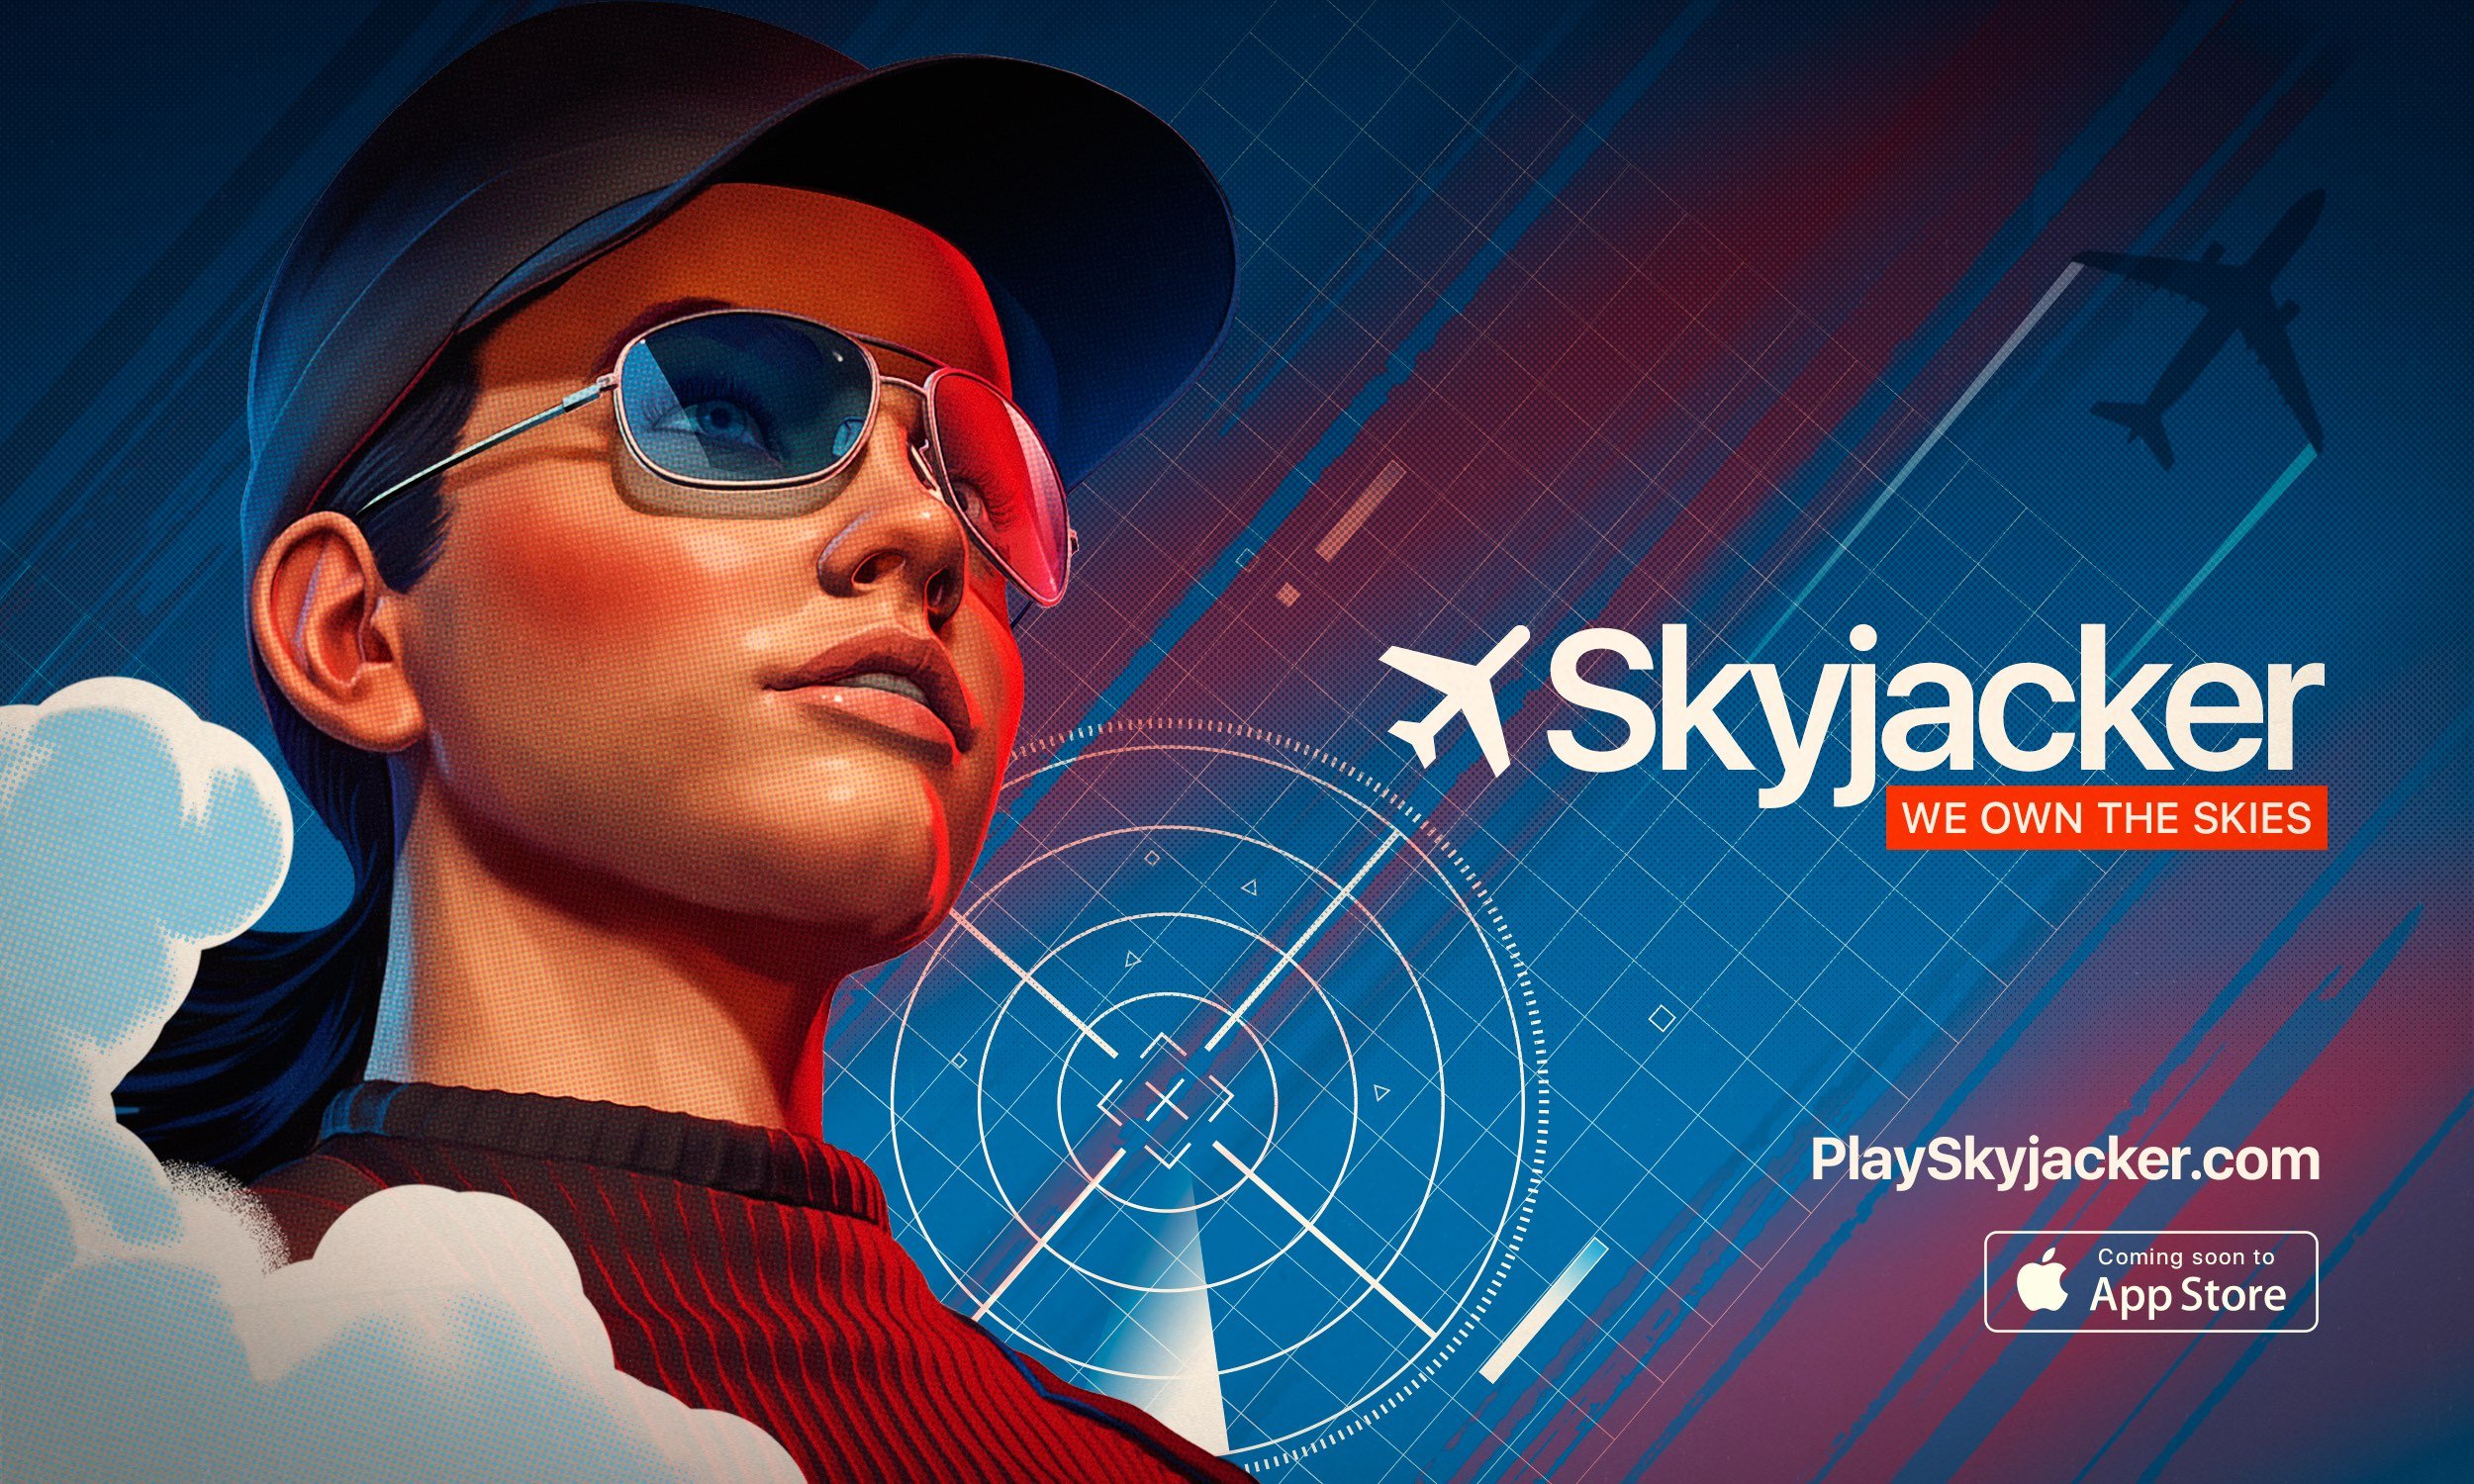 Take Control of the Skies with Skyjacker